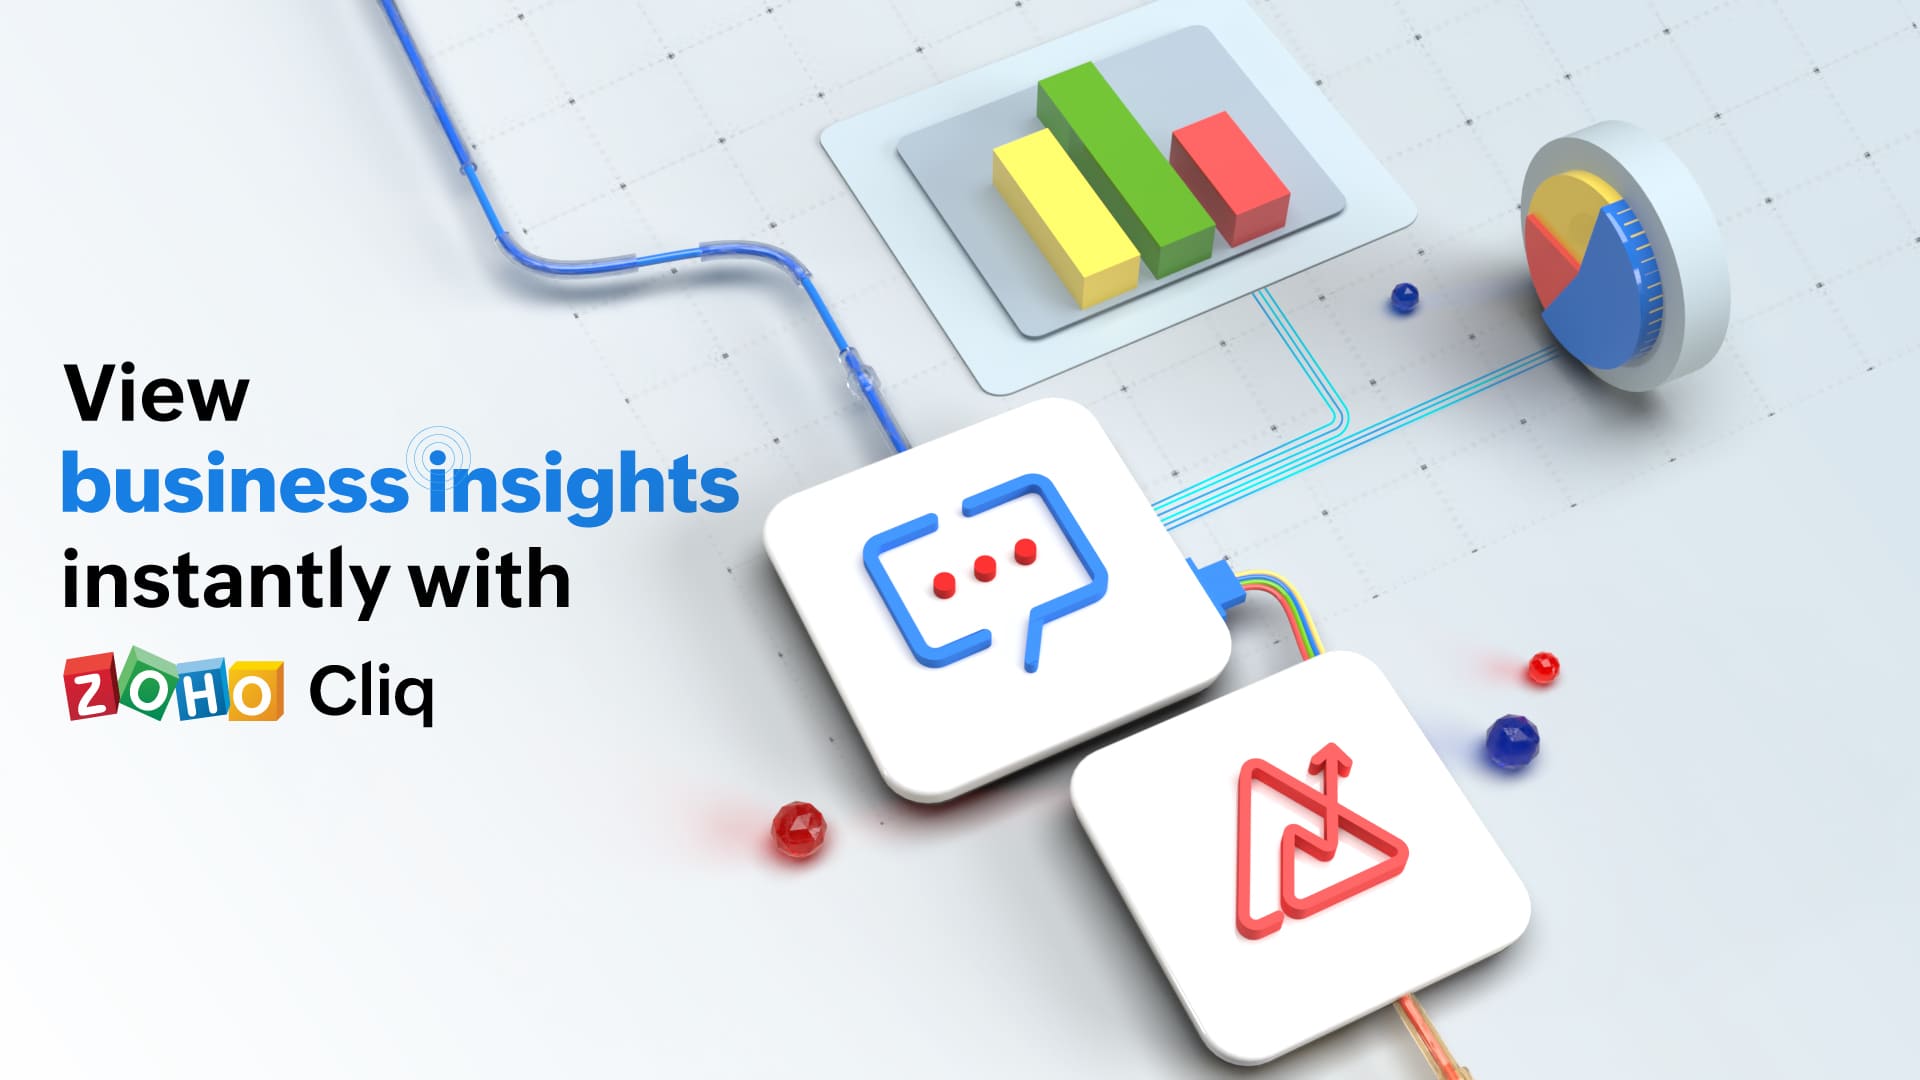 View business insights instantly with Zoho Cliq